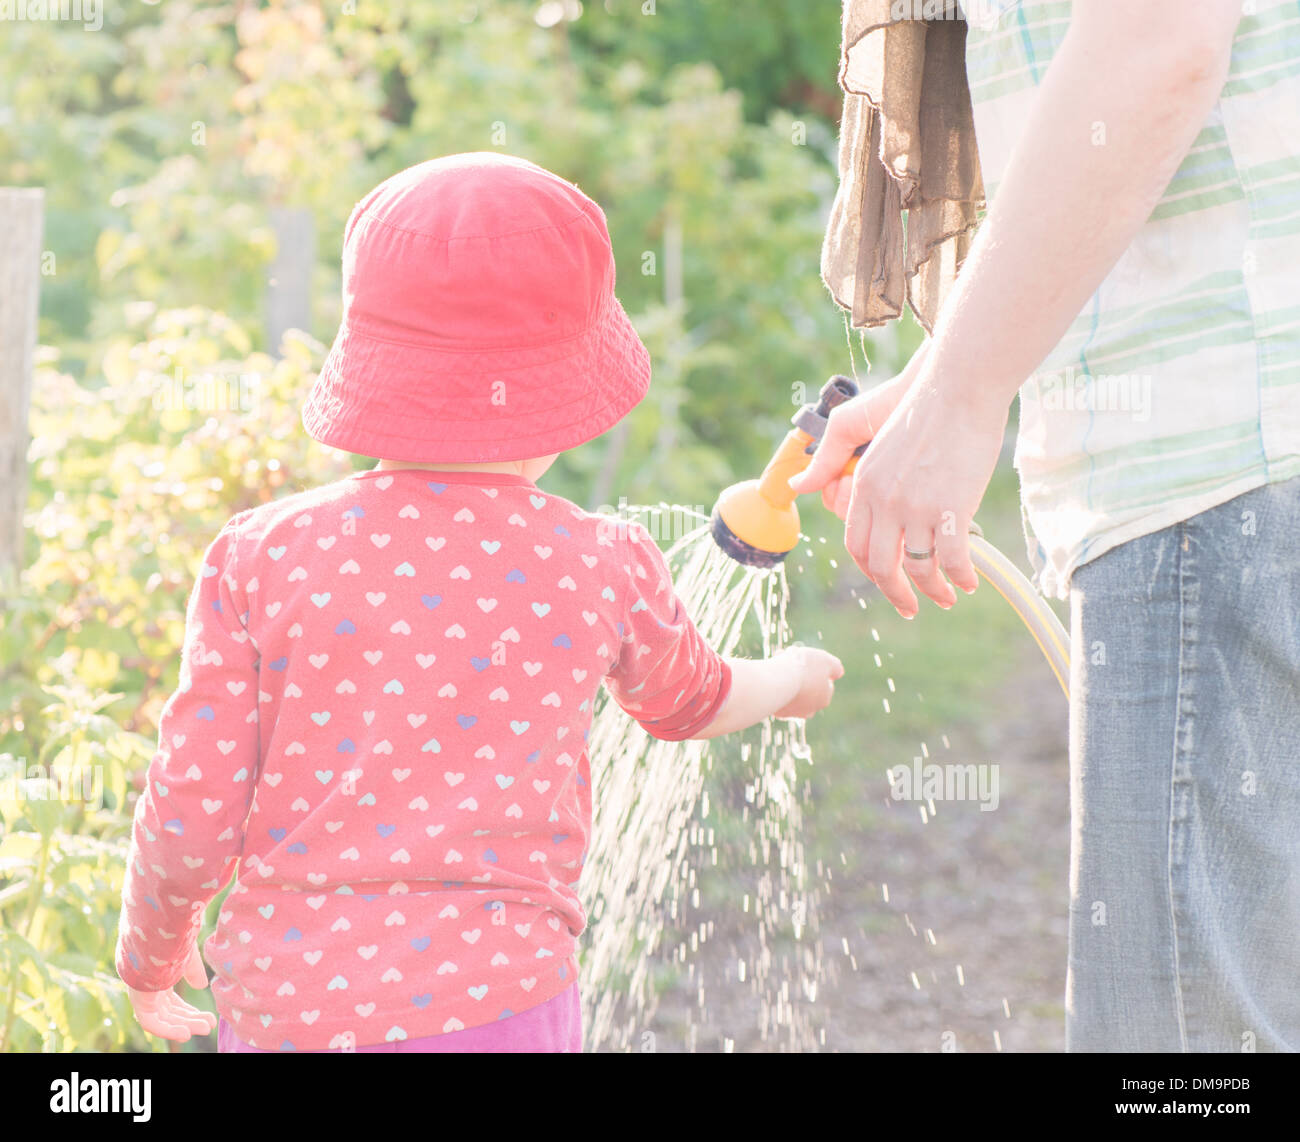 Lifestyle summer scene. Little girl playing with parent in garden, feeling water from sprinkler Stock Photo